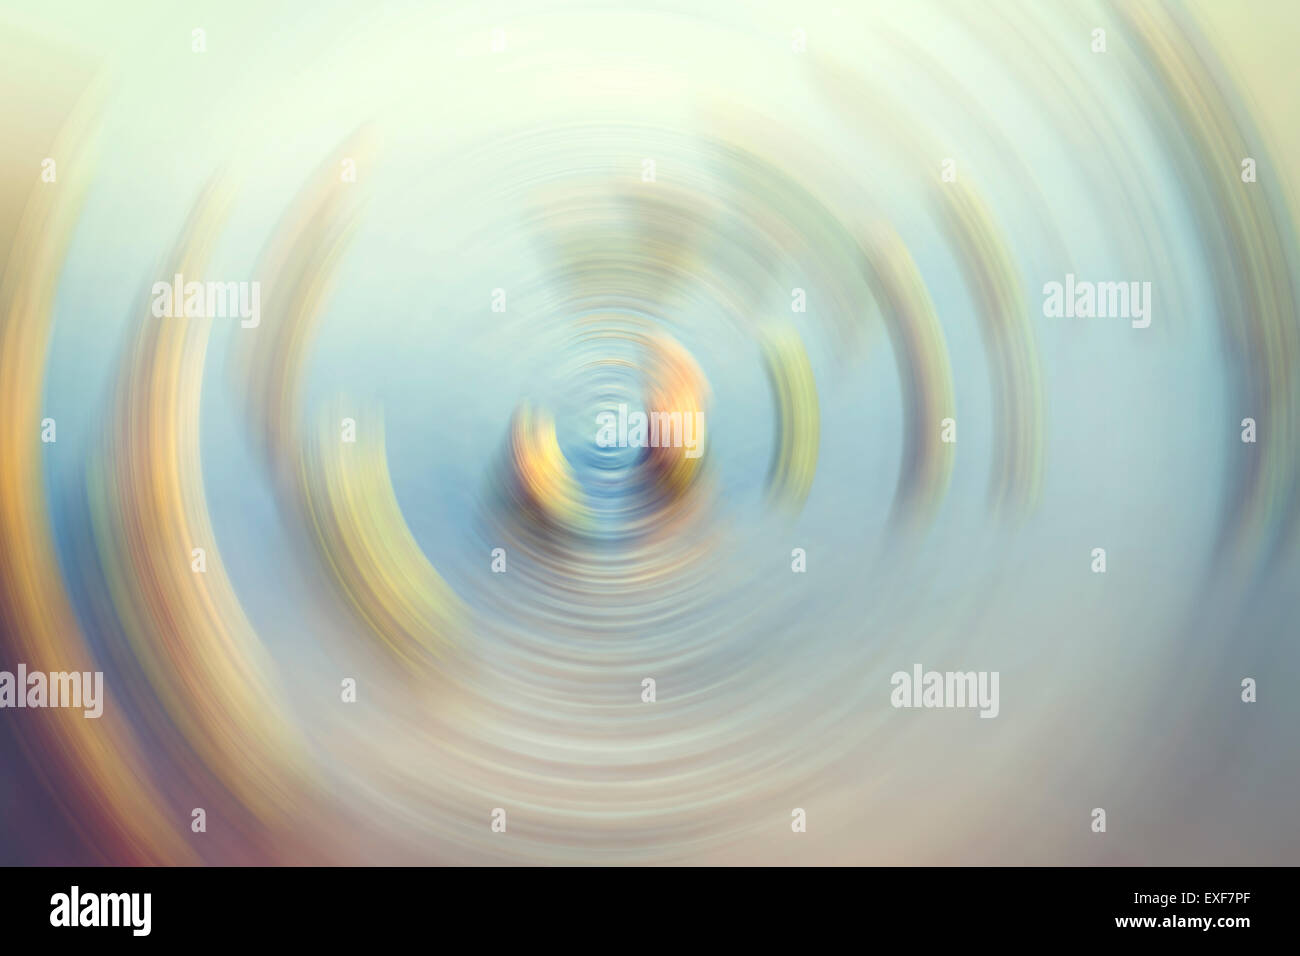 Motion blurred abstract background, rotation effect. Stock Photo